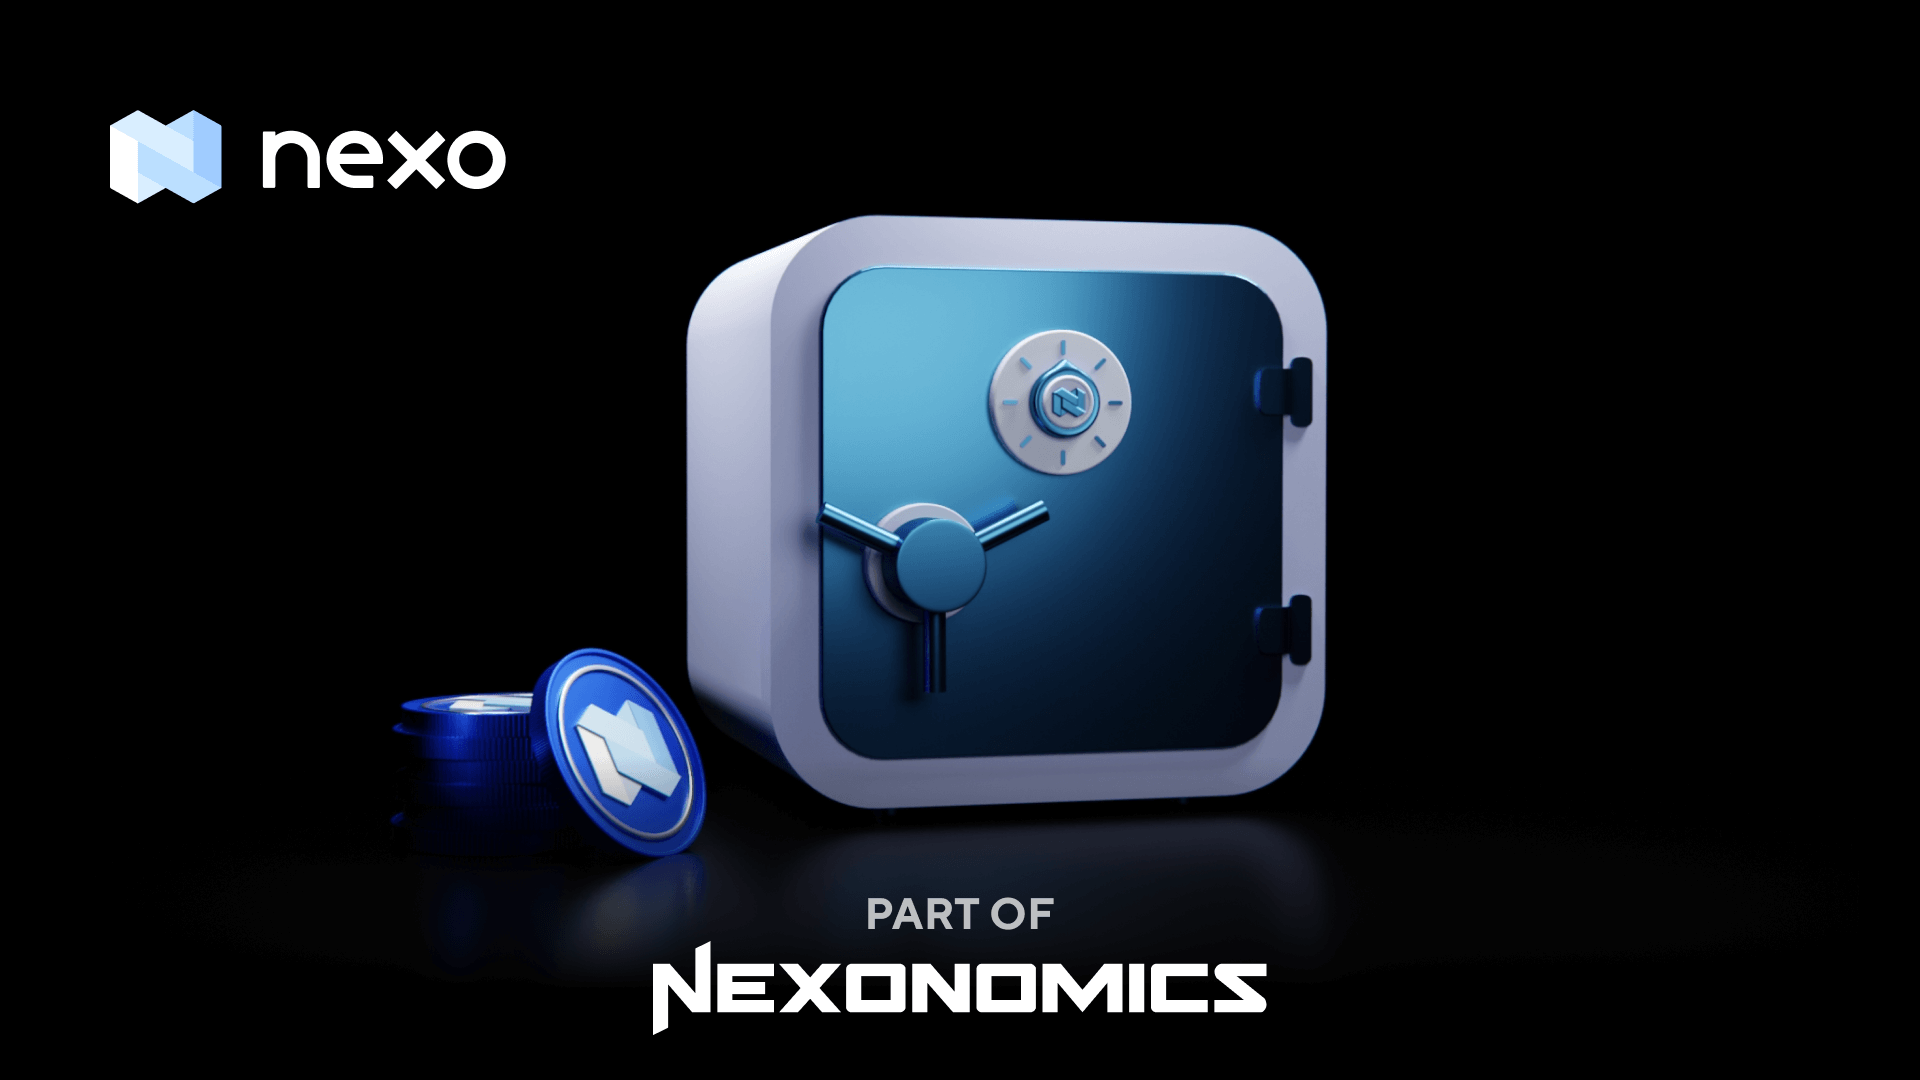 What are buyback programs and why does Nexo have one?